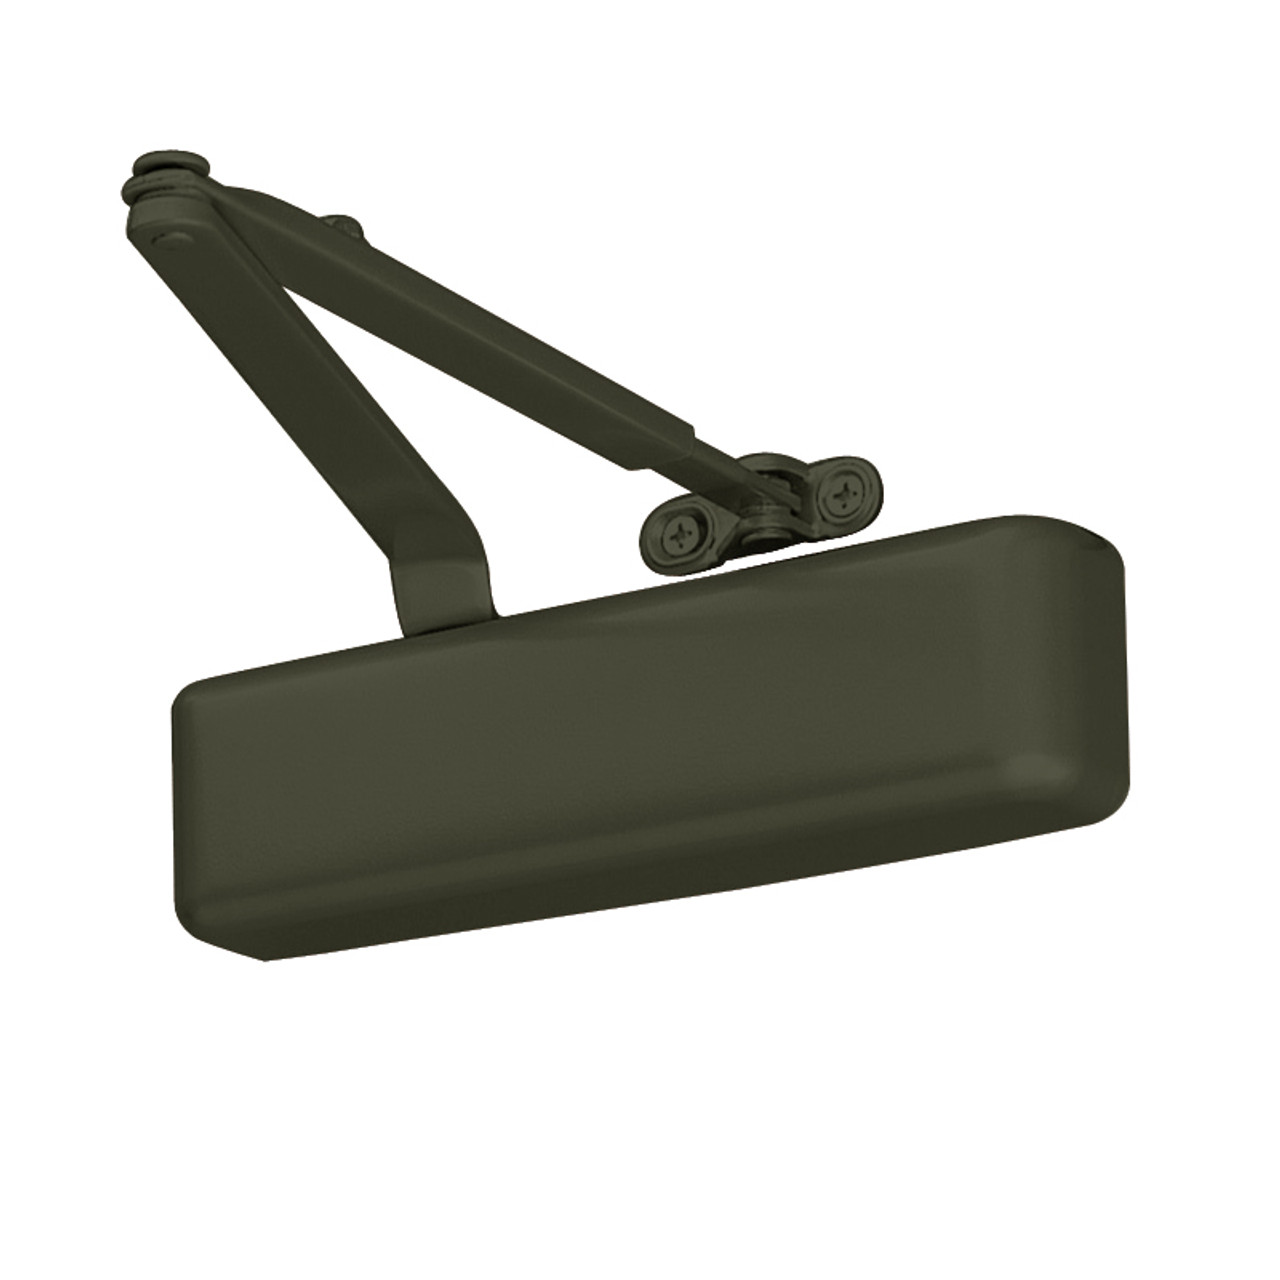 4031-LD-US10B LCN Door Closer with Light Duty Arm in Oil Rubbed Bronze Finish